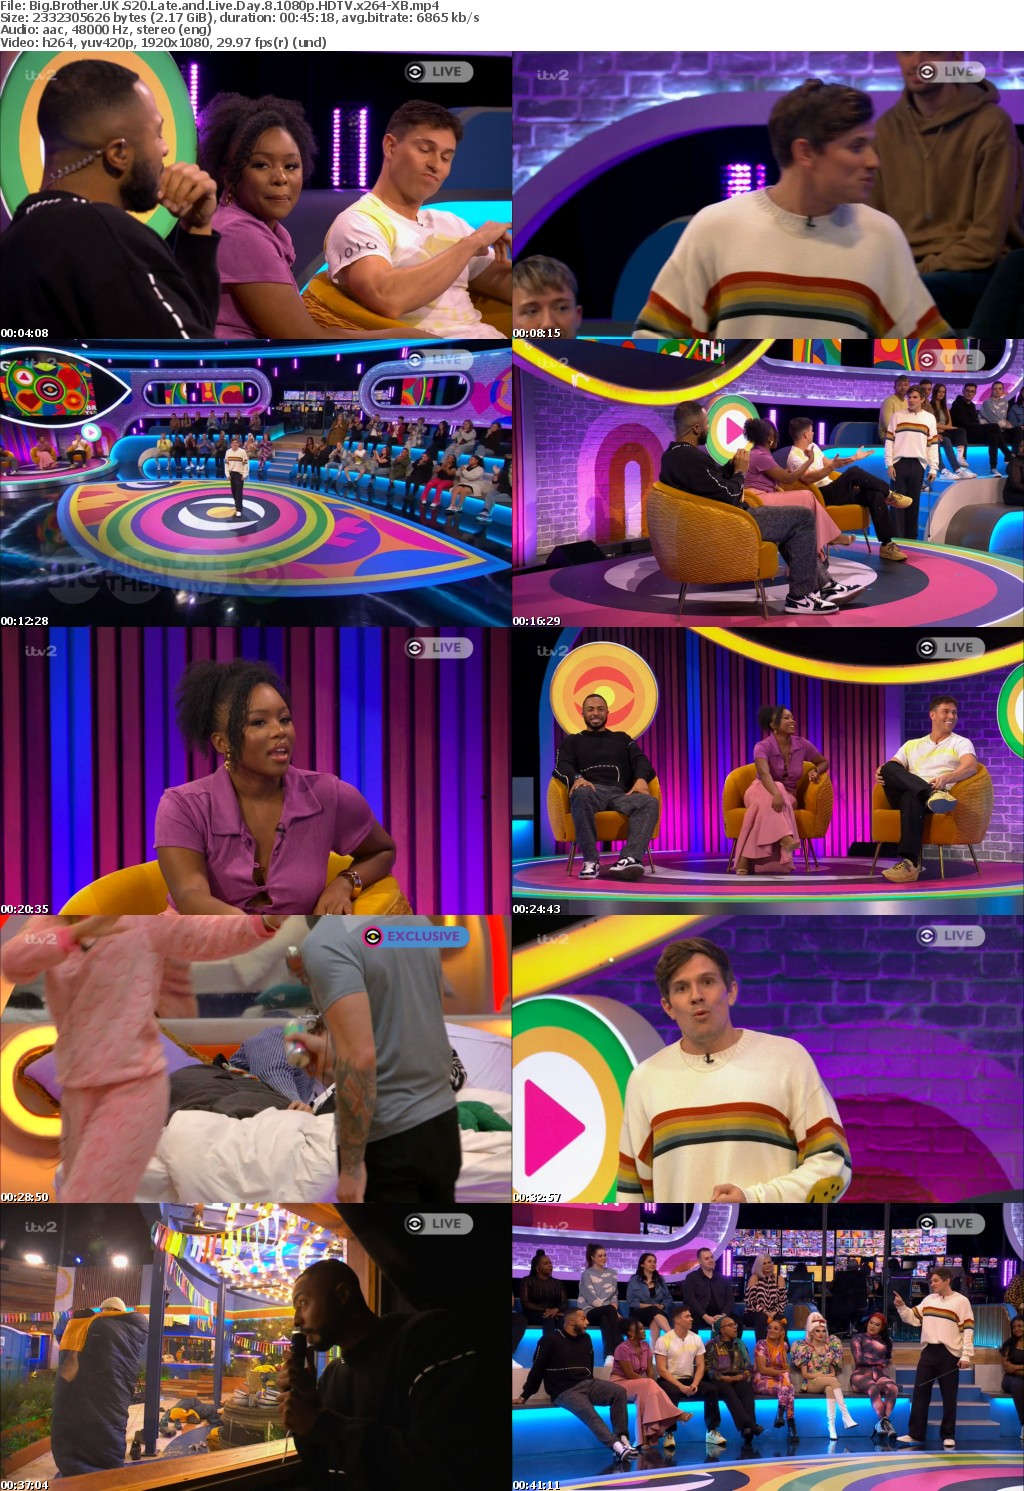 Big Brother UK S20 Late and Live Day 8 1080p HDTV x264-XB